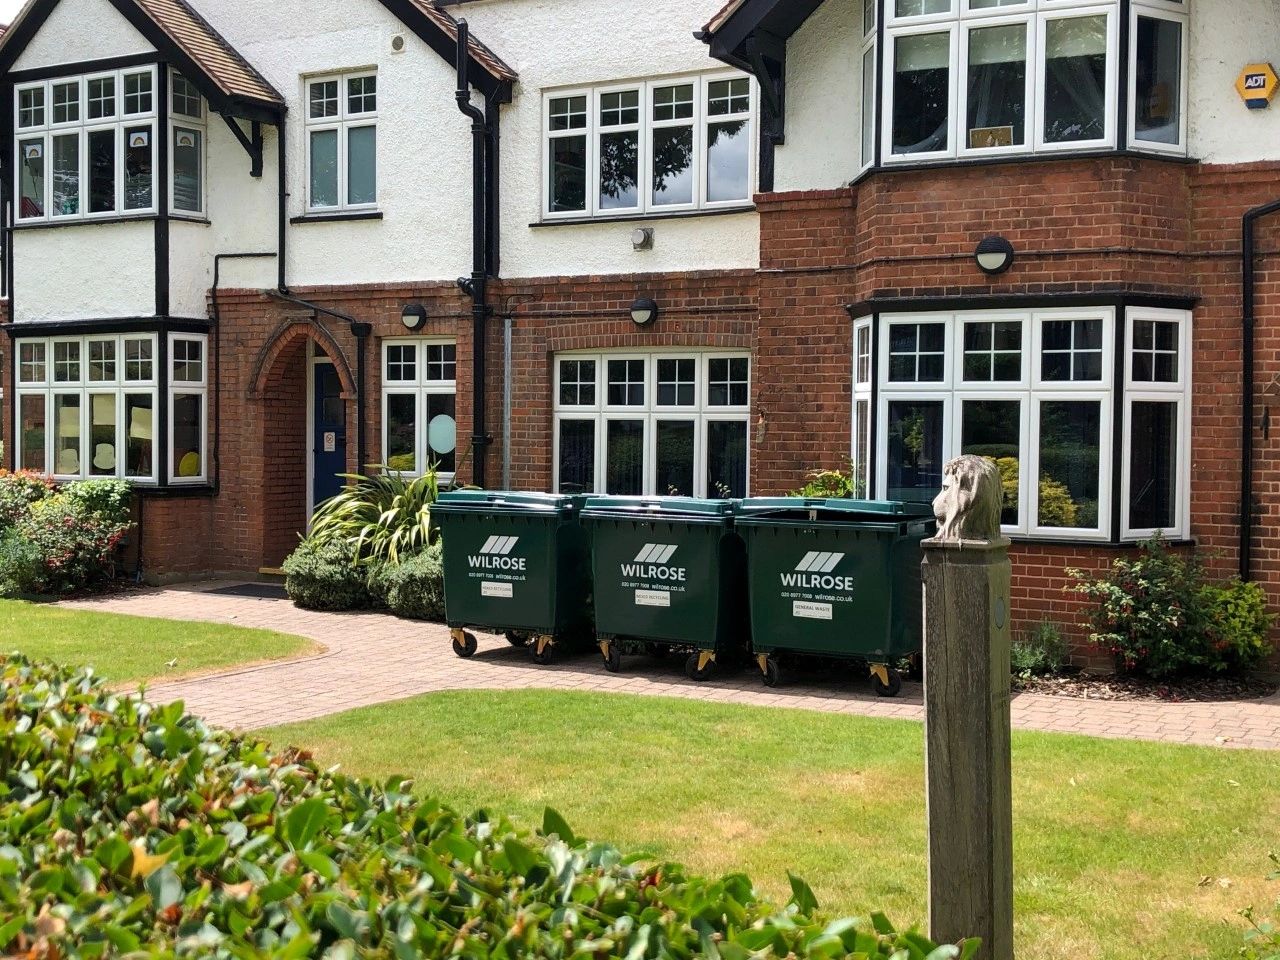 Commercial Waste Collection from a school in Hampton village.